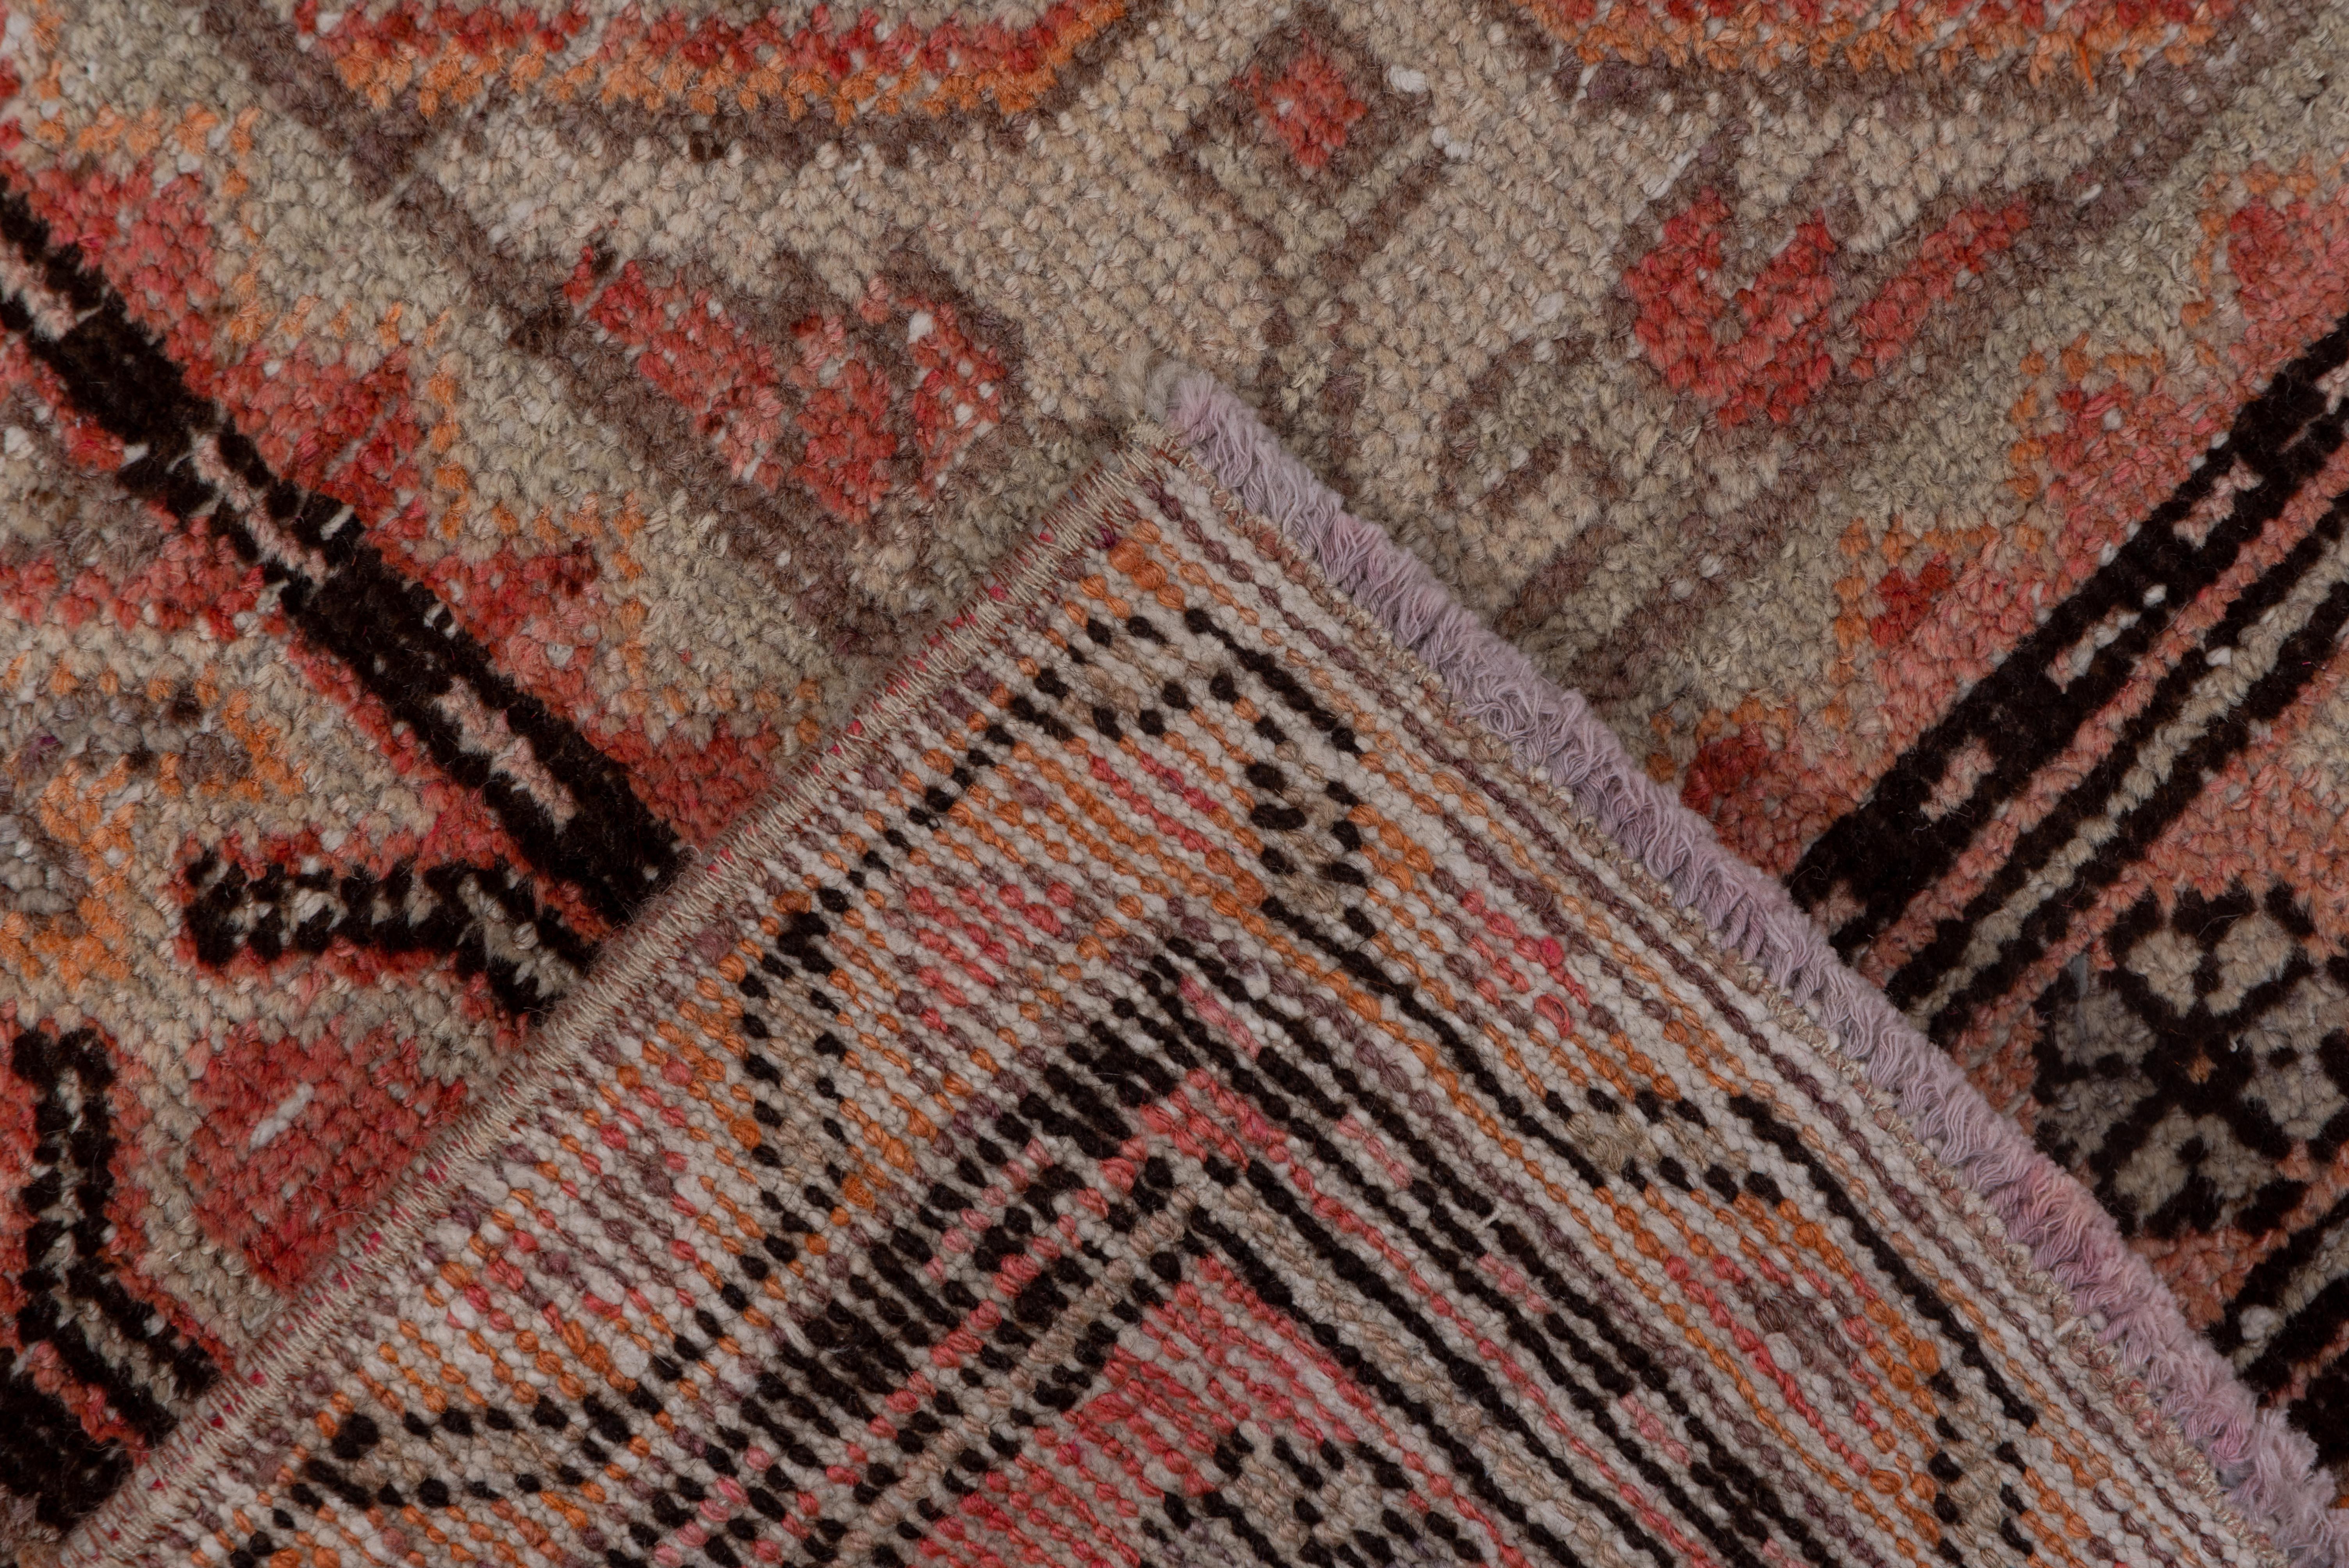 Antique Khotan Rug - Red Hues, Triangular Detailing In Good Condition For Sale In New York, NY